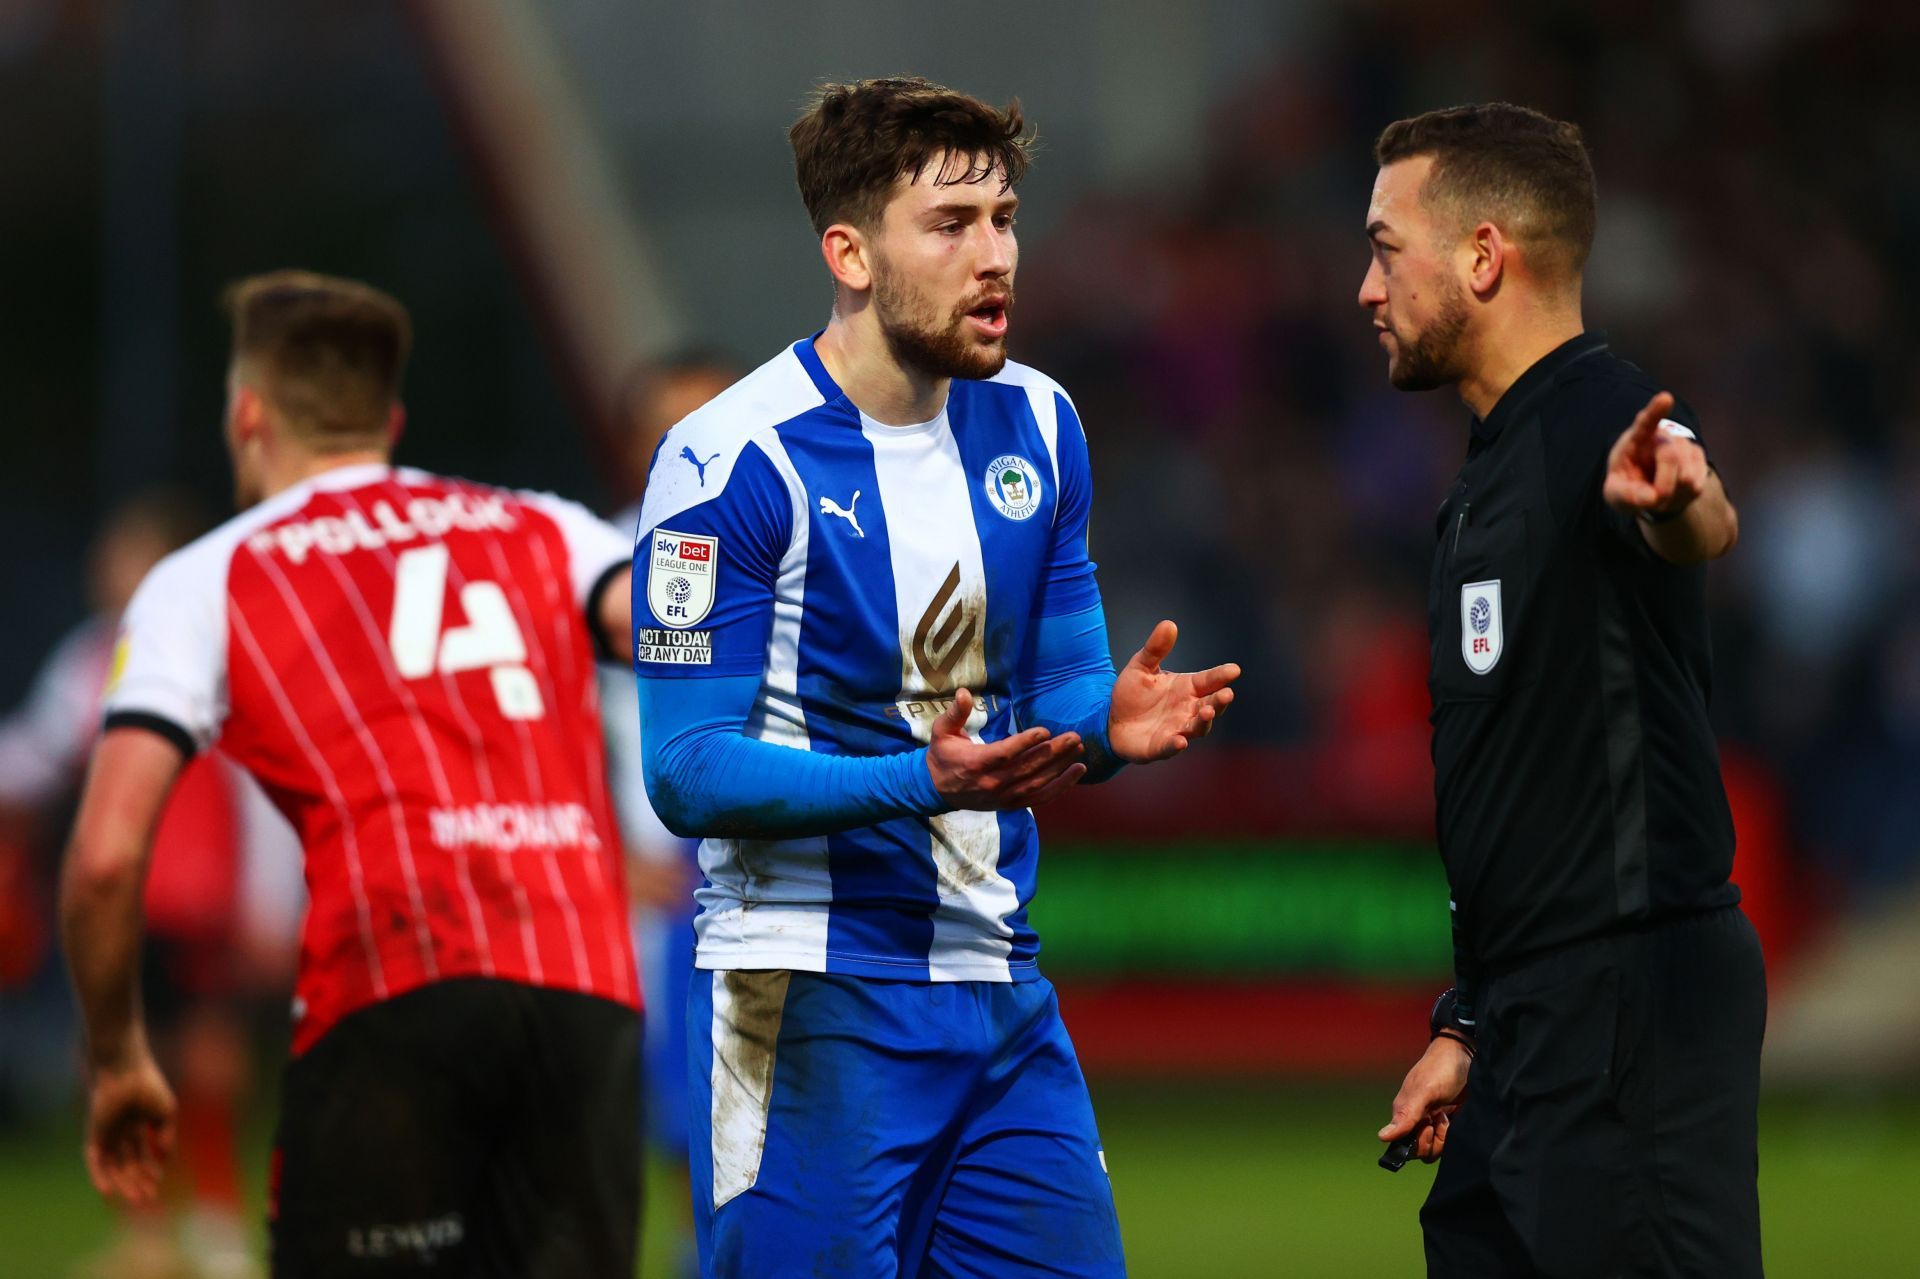 Wigan Athletic travel to Sheffield in their League One fixture on Tuesday night